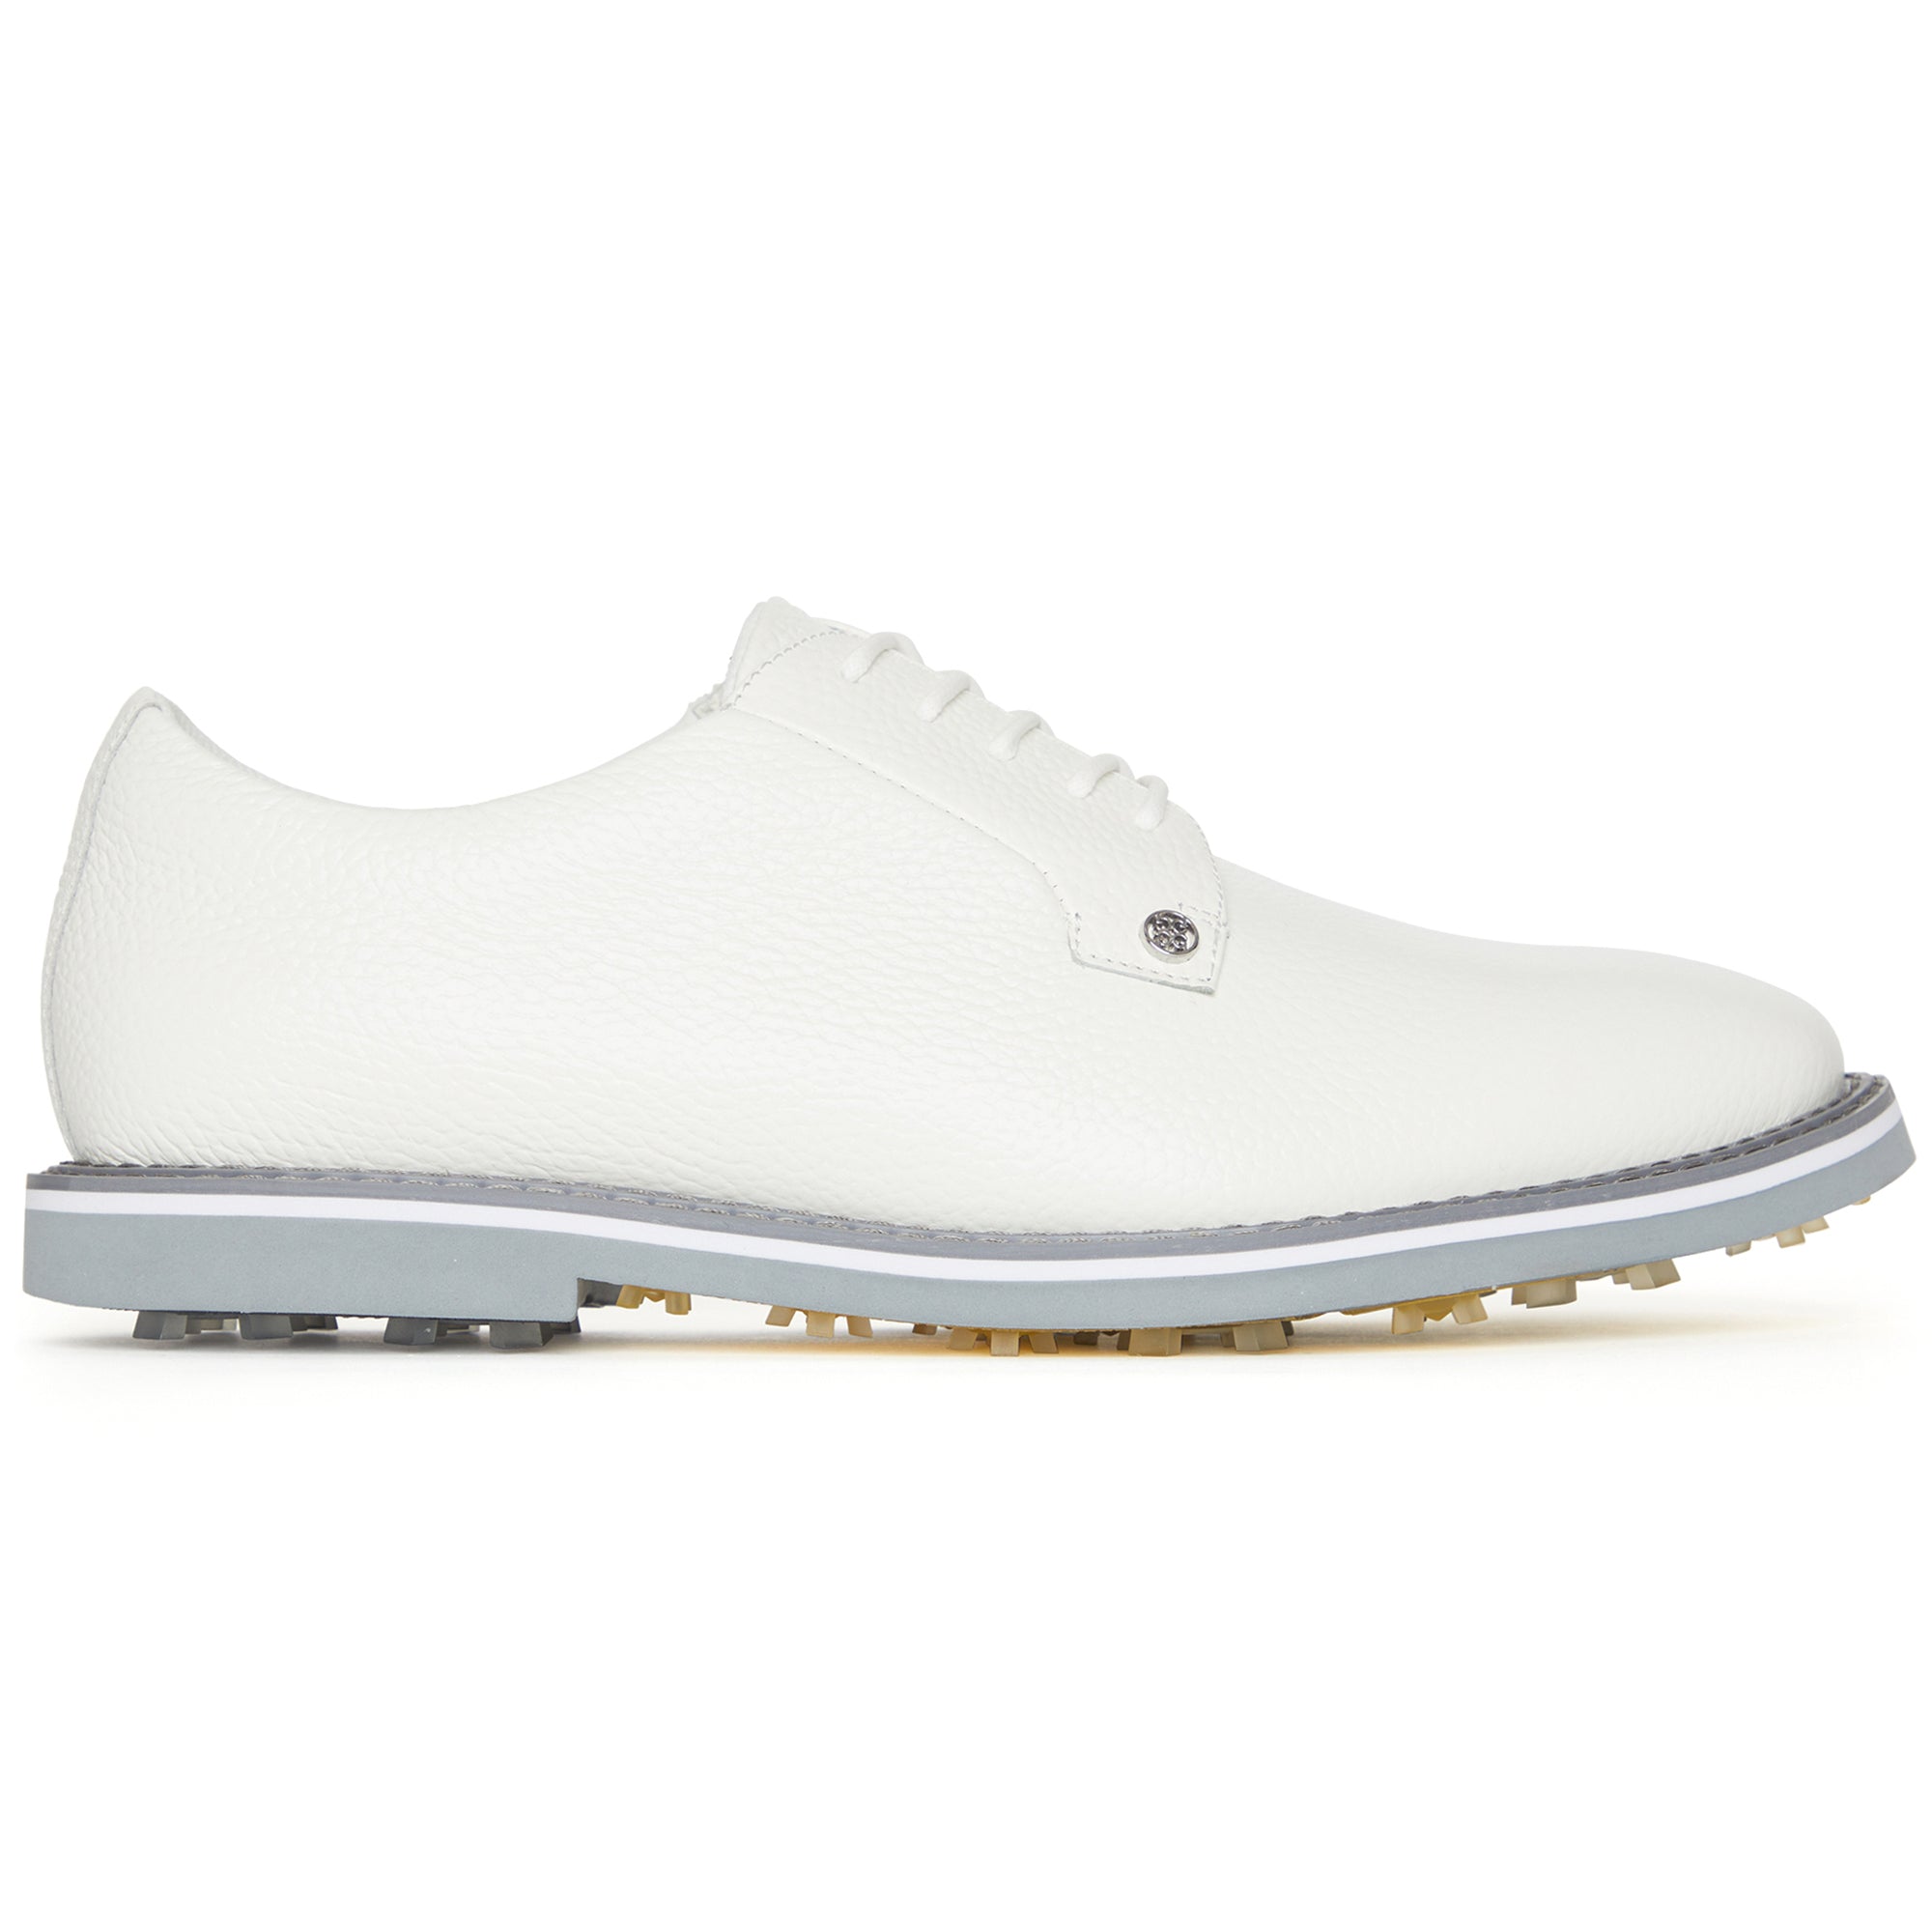 g-fore-gallivanter-pebble-leather-golf-shoes-gmf000001-snow-monument